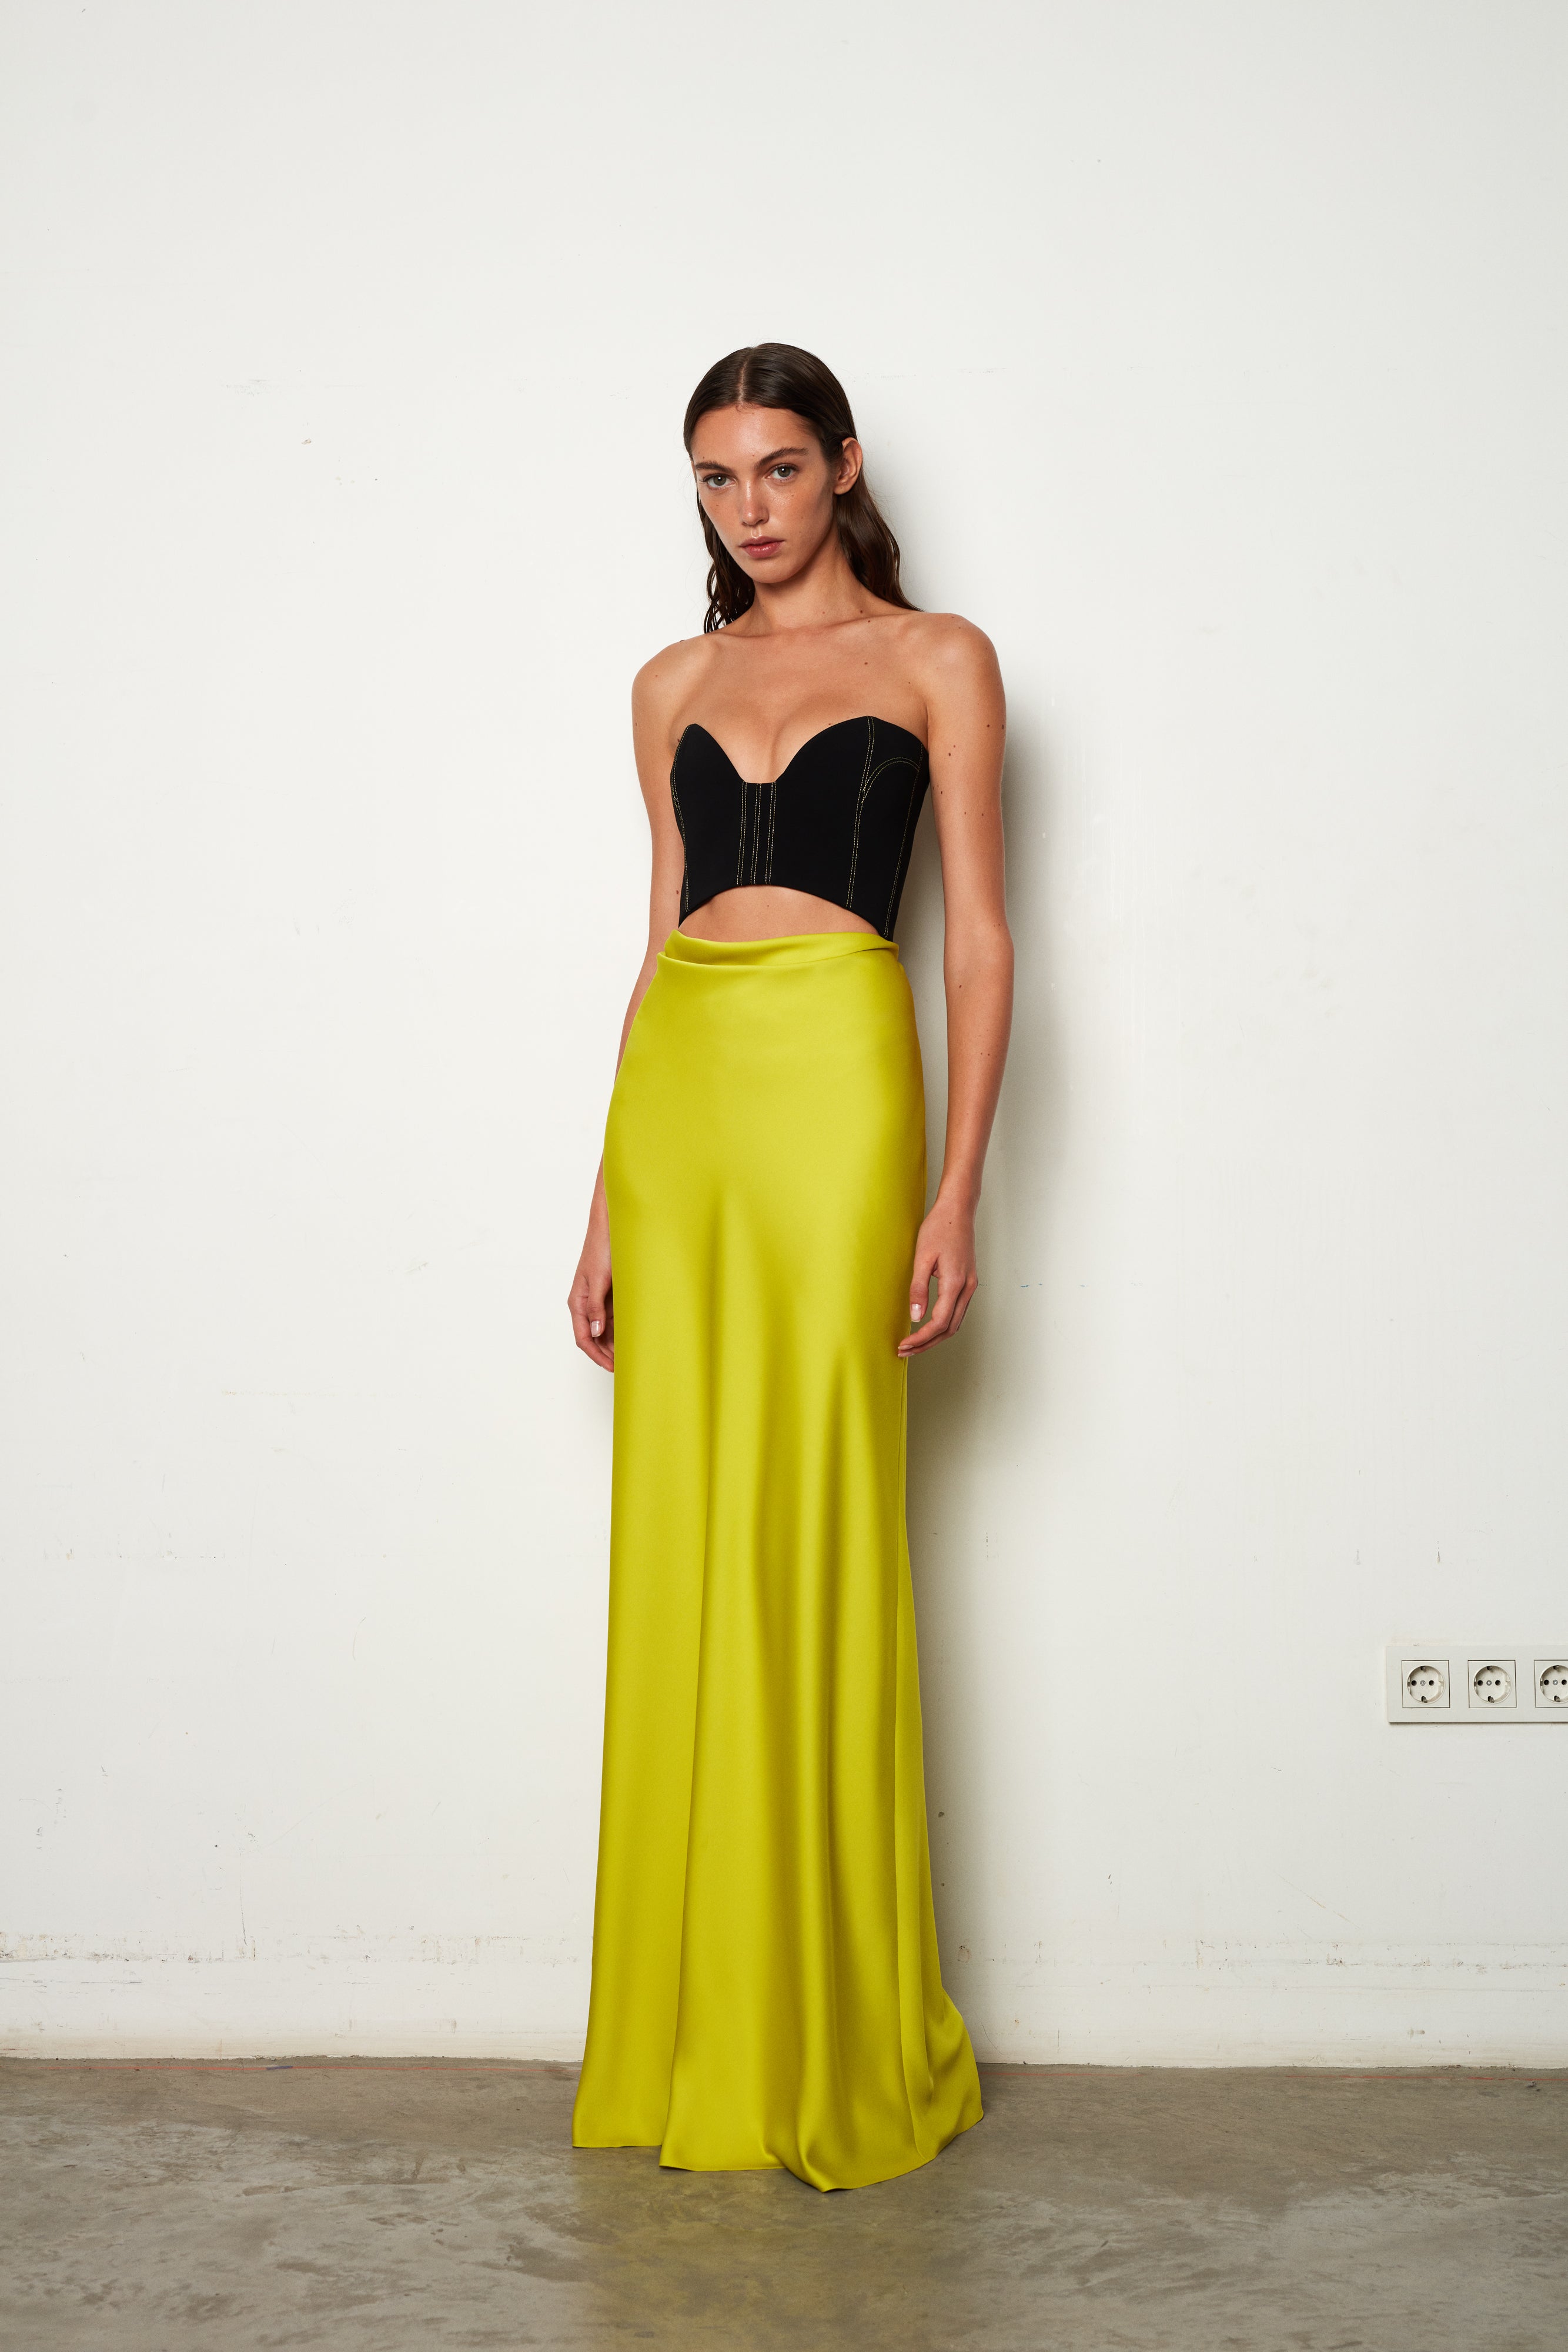 Pina - Corsetry Inspired Strapless Maxi Dress